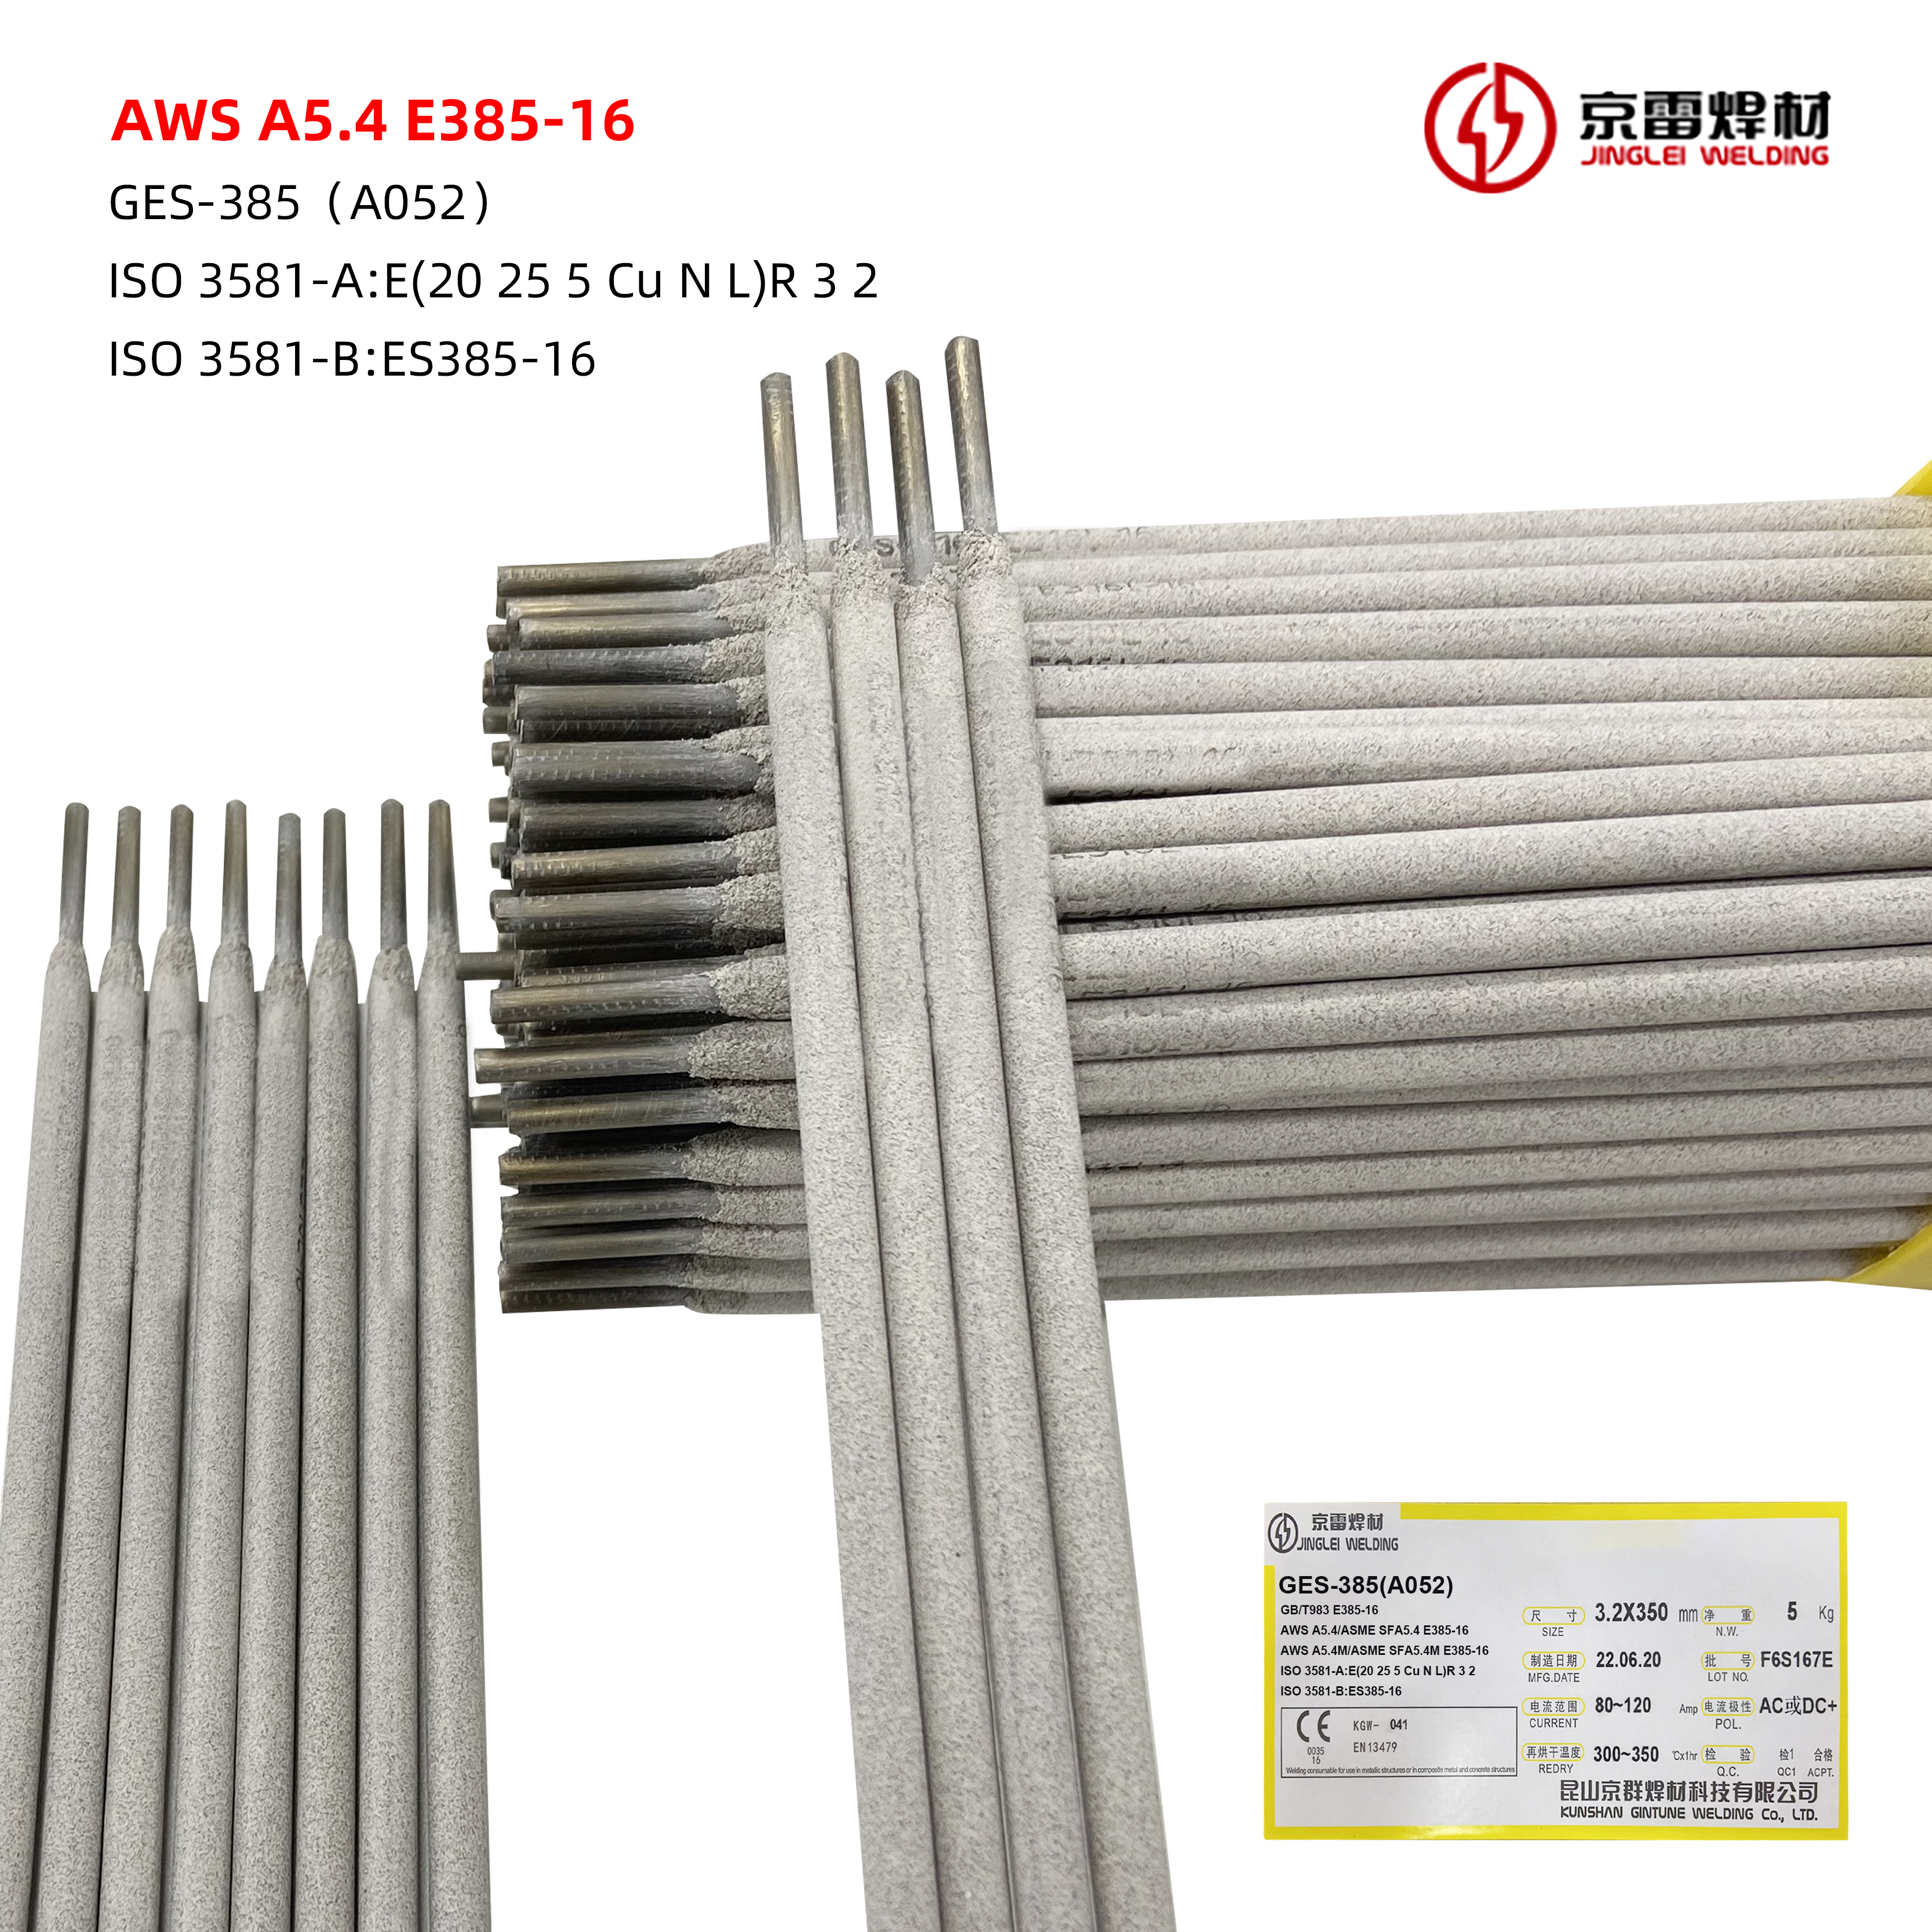 Stainless steels Manual electrode E385-16 weld fabrication connection